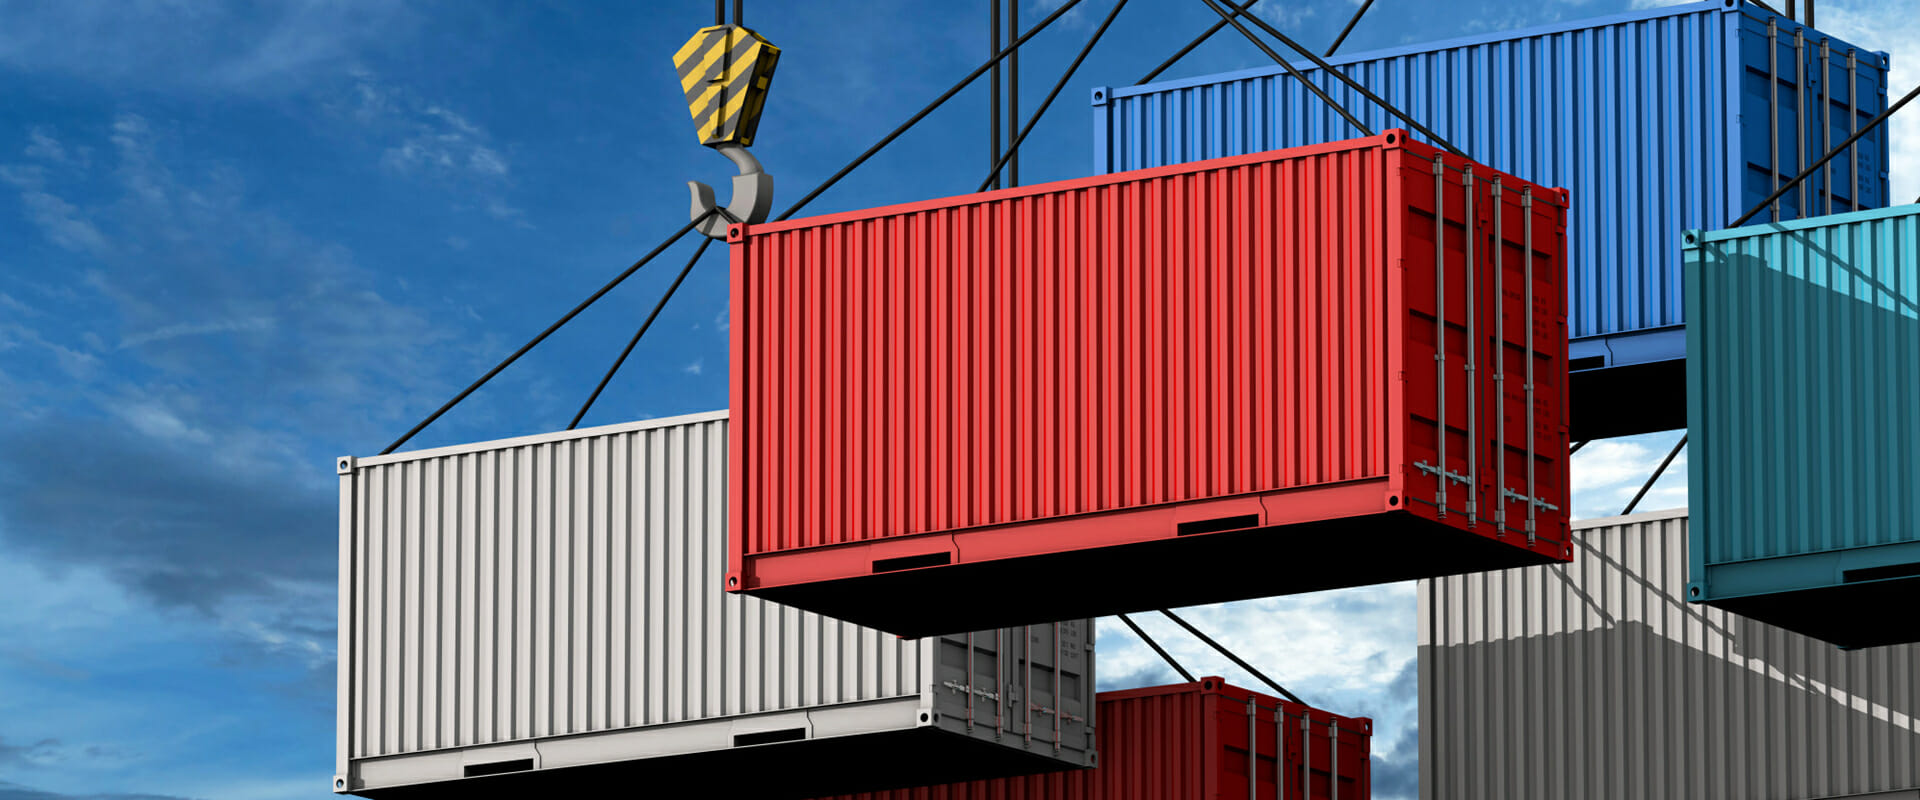 crane-hook-with-cargo-container-text-3d-render1.jpg